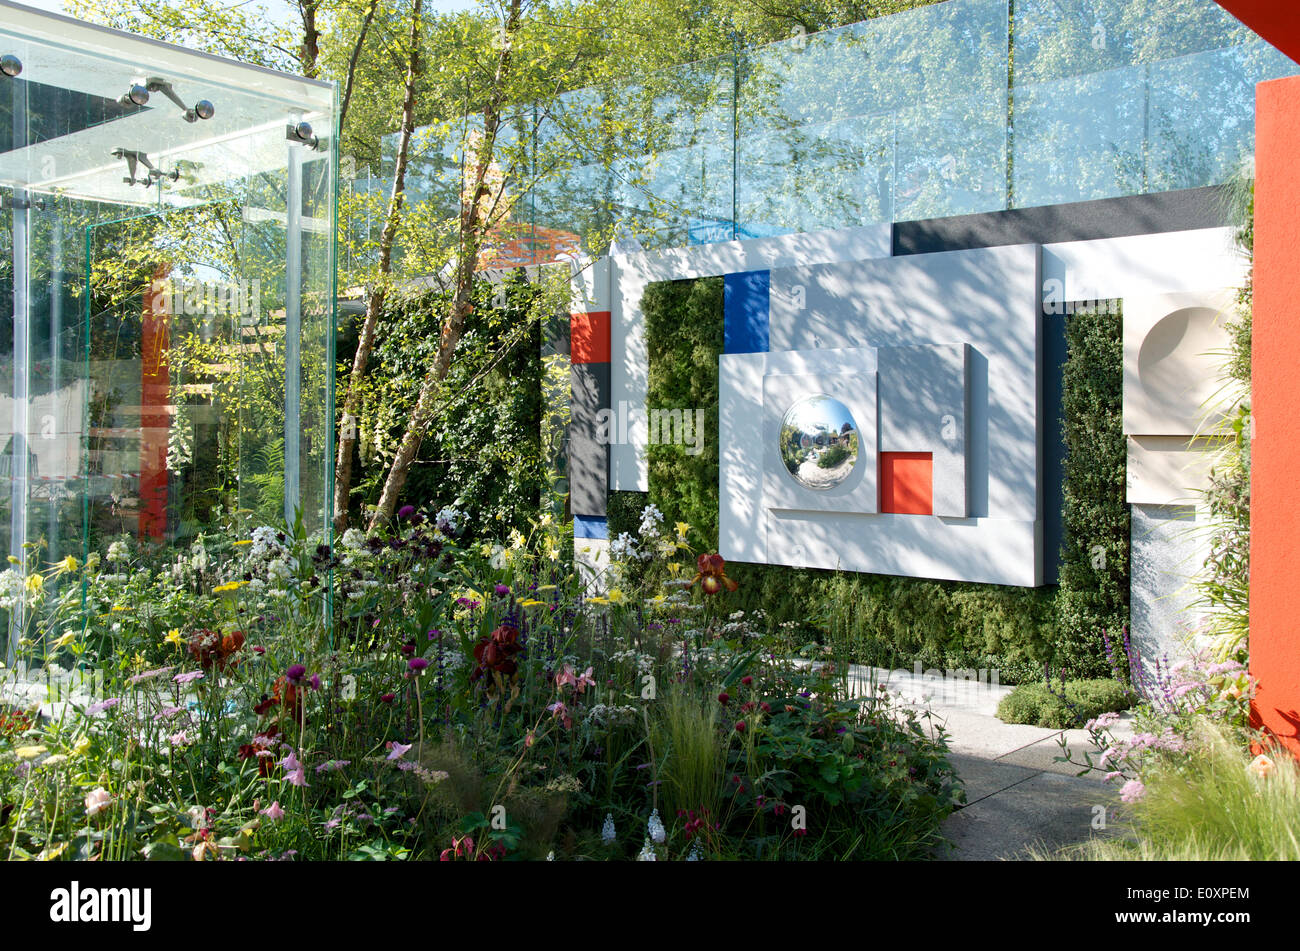 Gold Medal winning garden 'The Minds Eye' at RHS Chelsea Flower Show. The garden designed by LDC Design for the RNIB (The Royal National Institute of Blind People) in partnership with Countryside features contrasting sensory experiences. Stock Photo